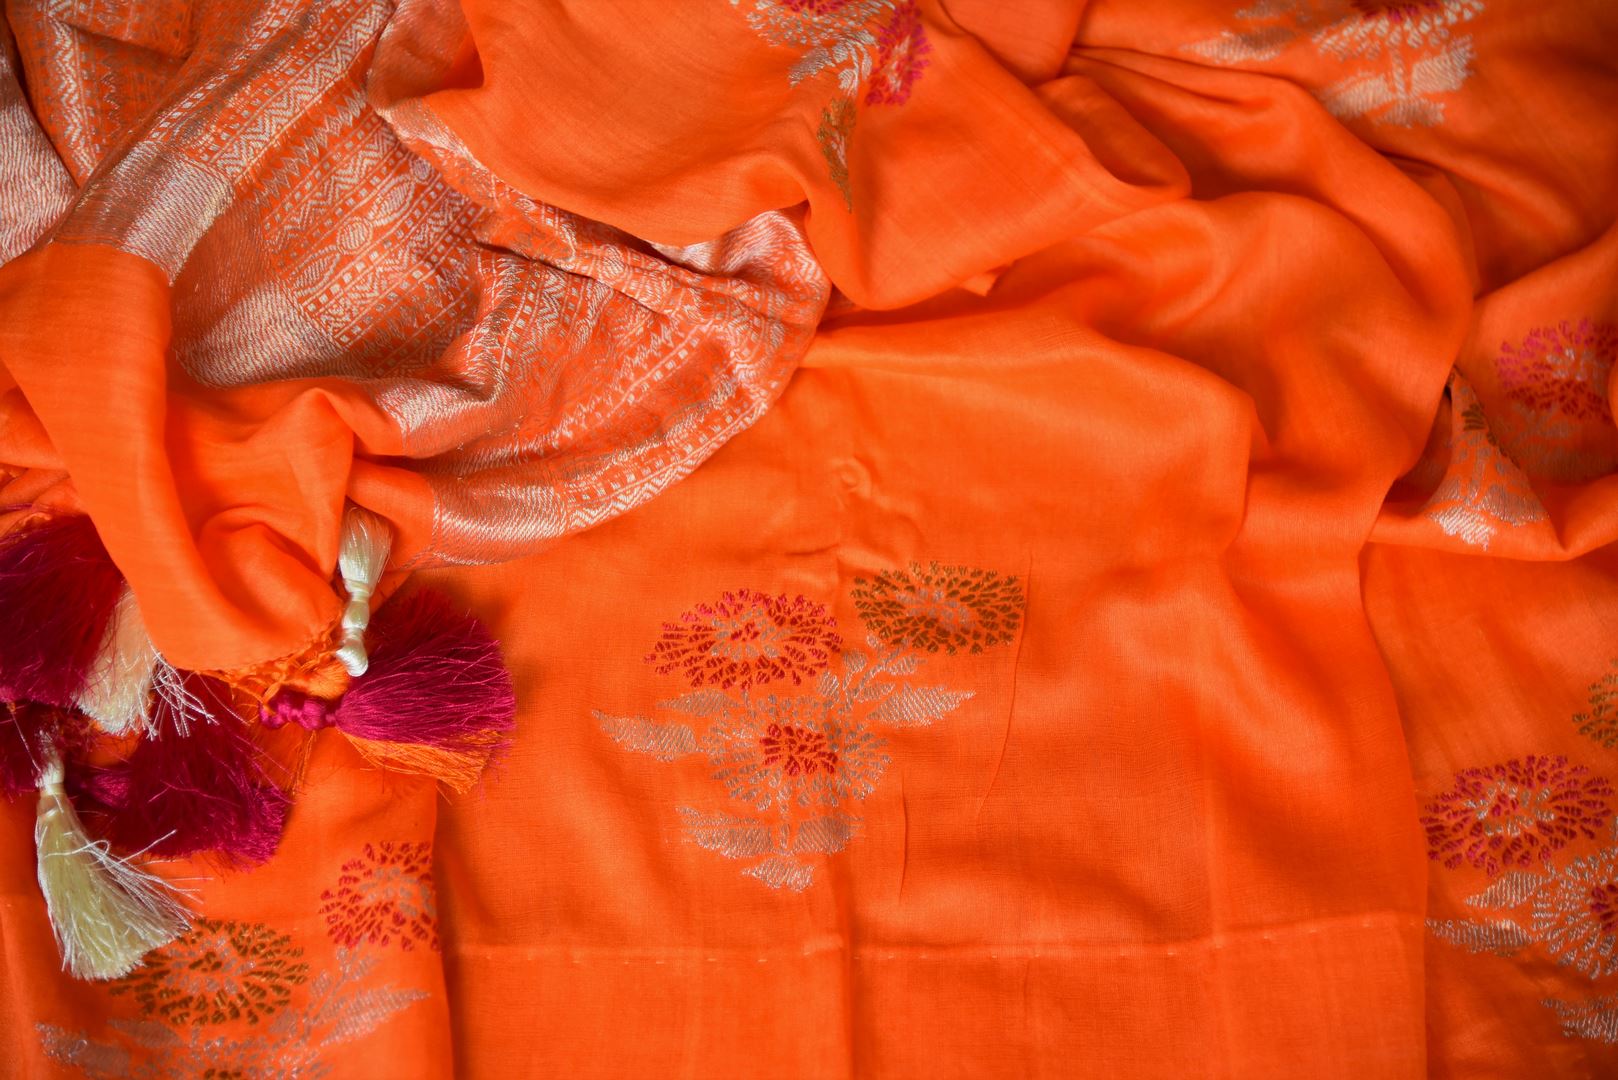 Shop beautiful orange muga Banarasi saree online in USA with floral buta from Pure Elegance online store. Visit our exclusive Indian clothing store in USA and get floored by a range of exquisite Indian Kanjivaram saris, Banarasi sarees, silk sarees, Indian jewelry and much more to complete your ethnic look.-details